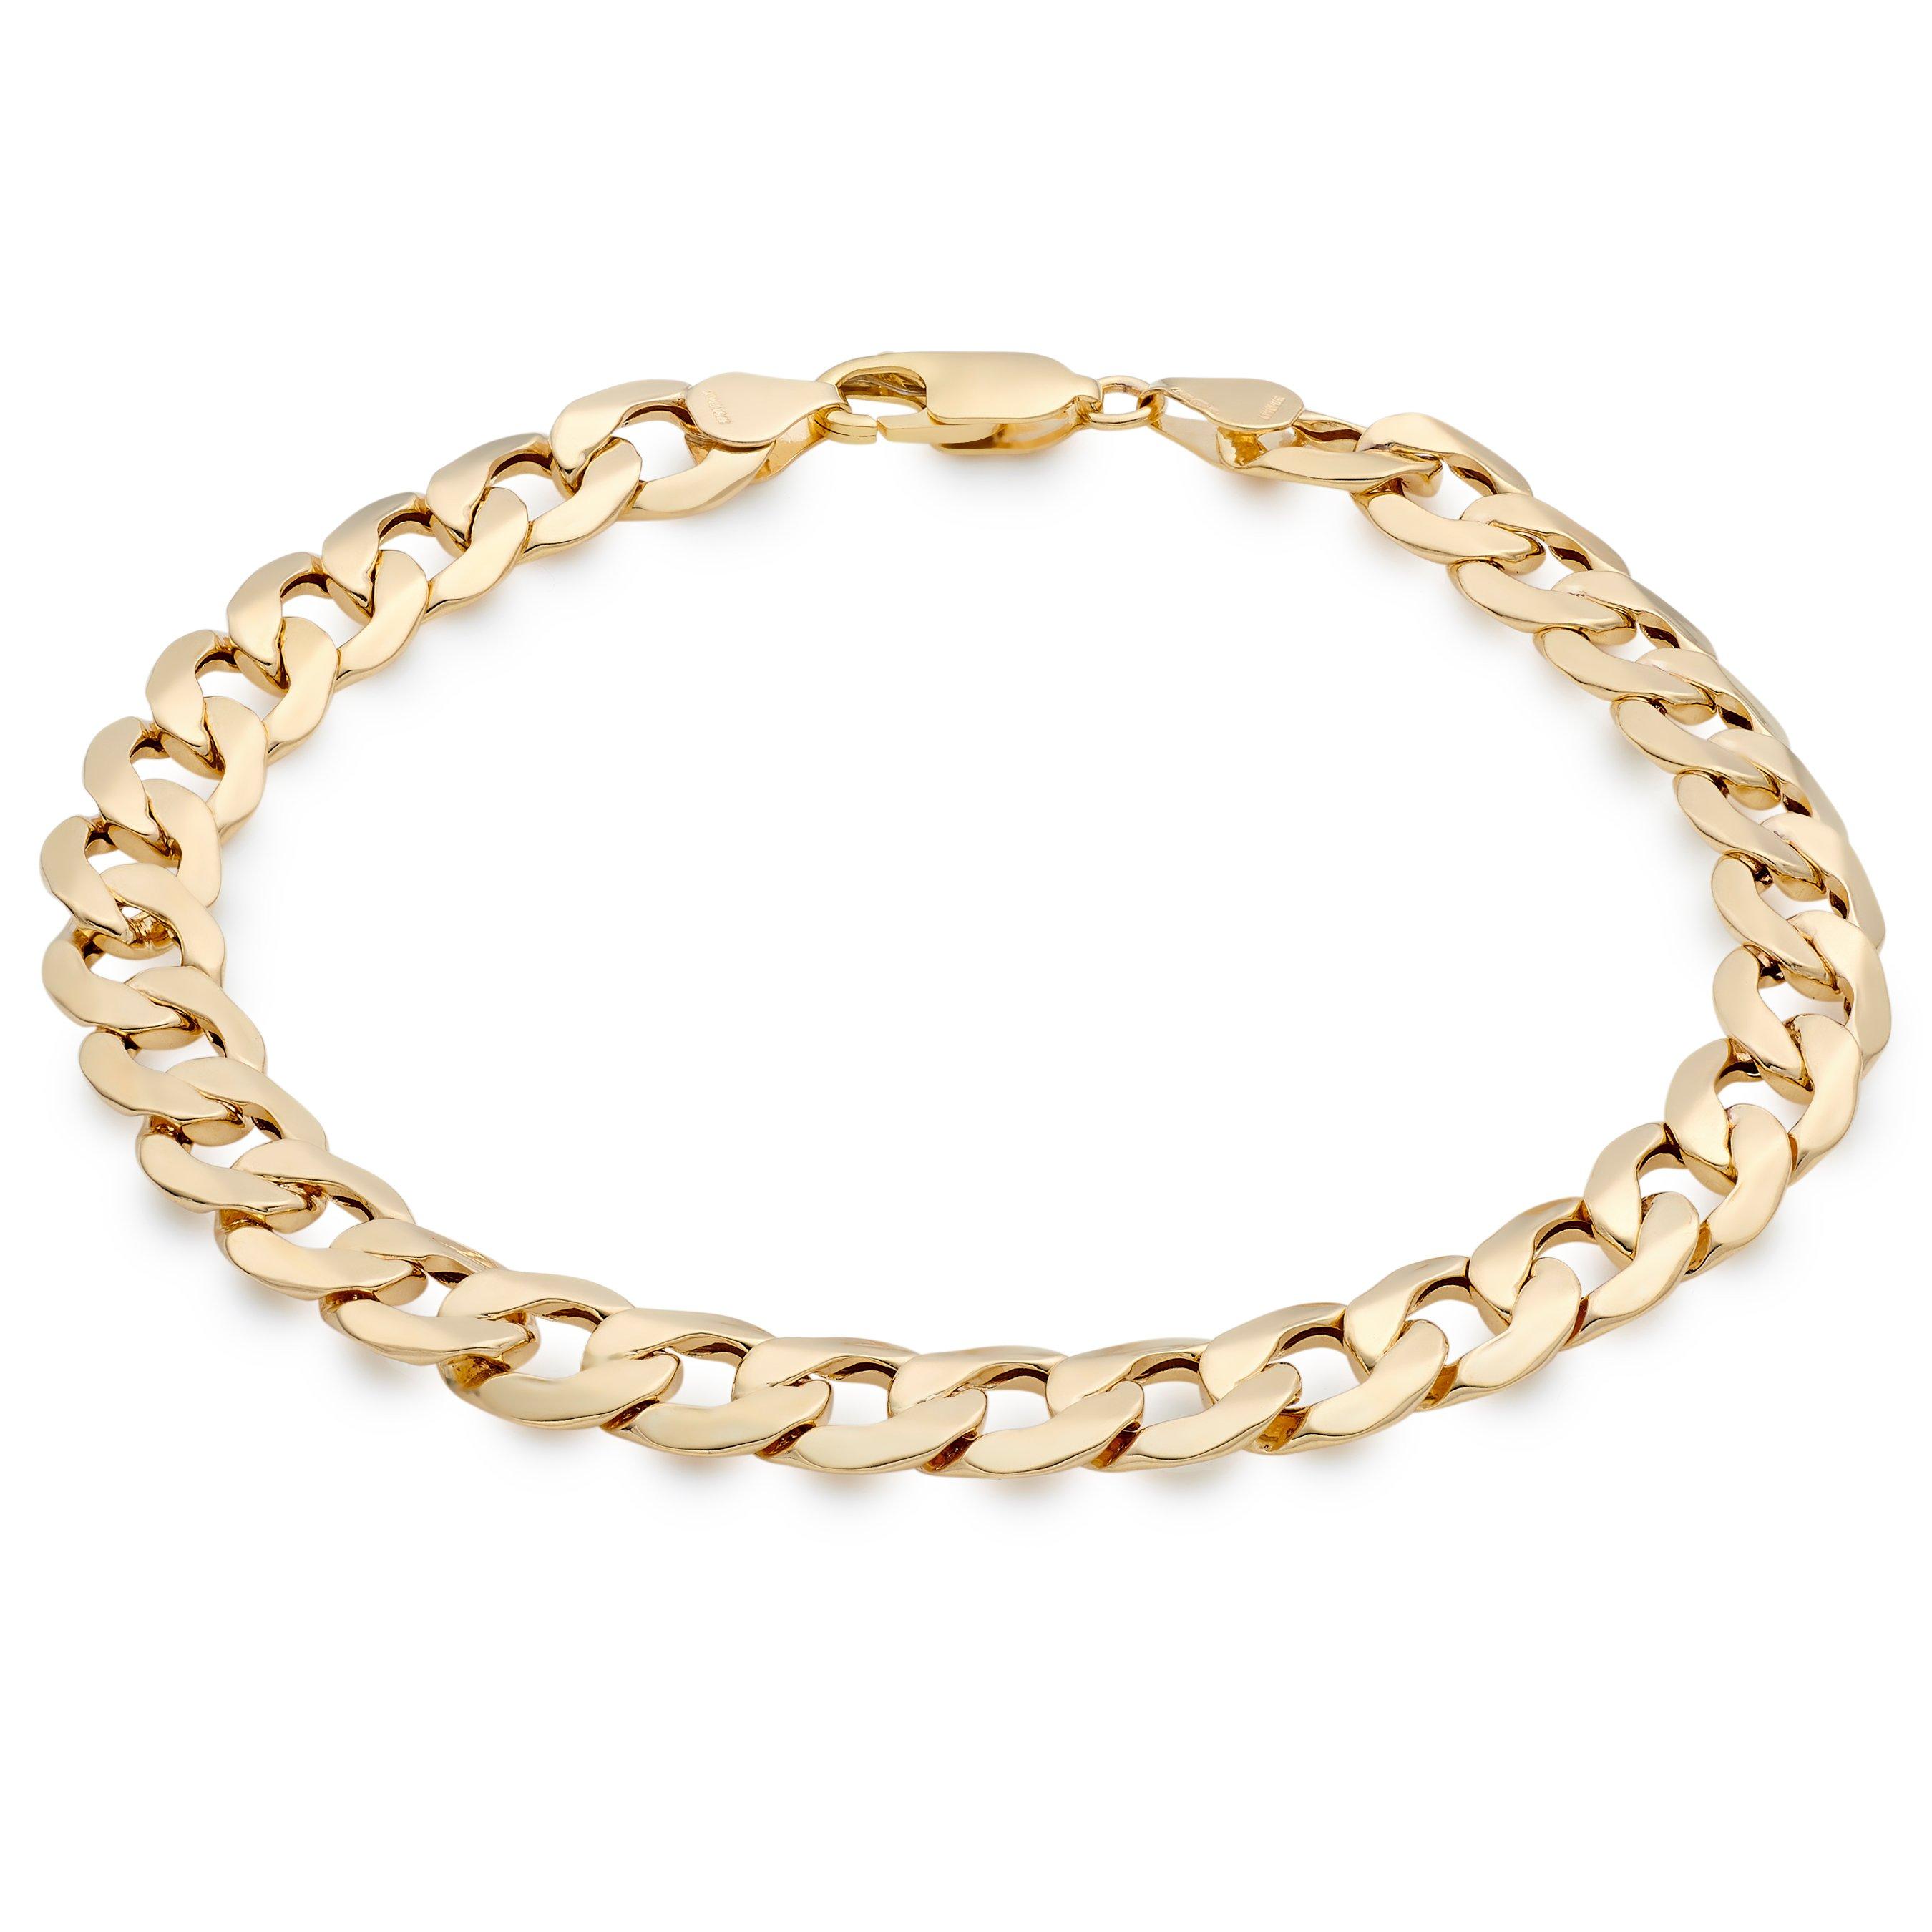 9ct Yellow Gold Curb Chain Bracelet | 0131395 | Beaverbrooks the Jewellers